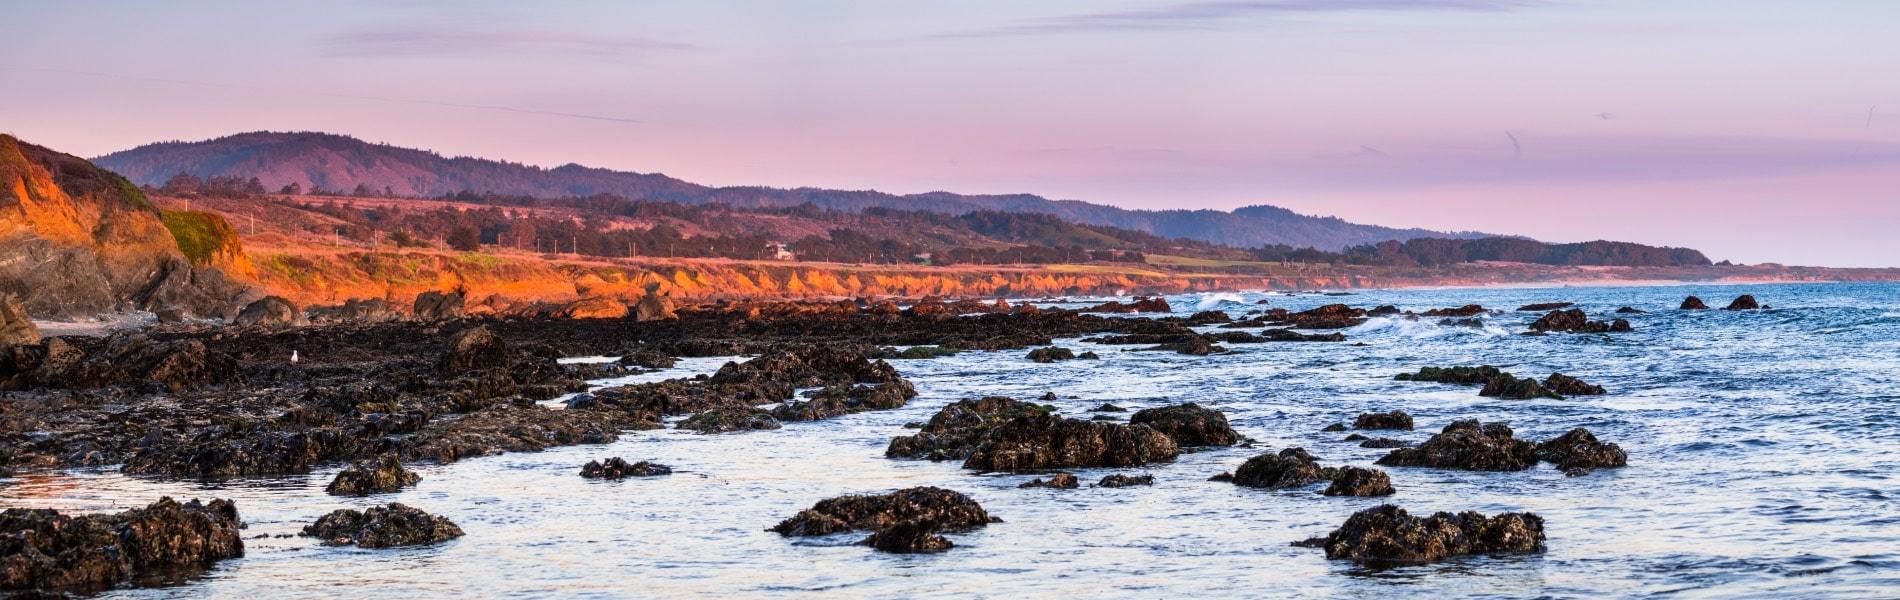 Sunset view of rocks and beach in Cliffwood Heights, California